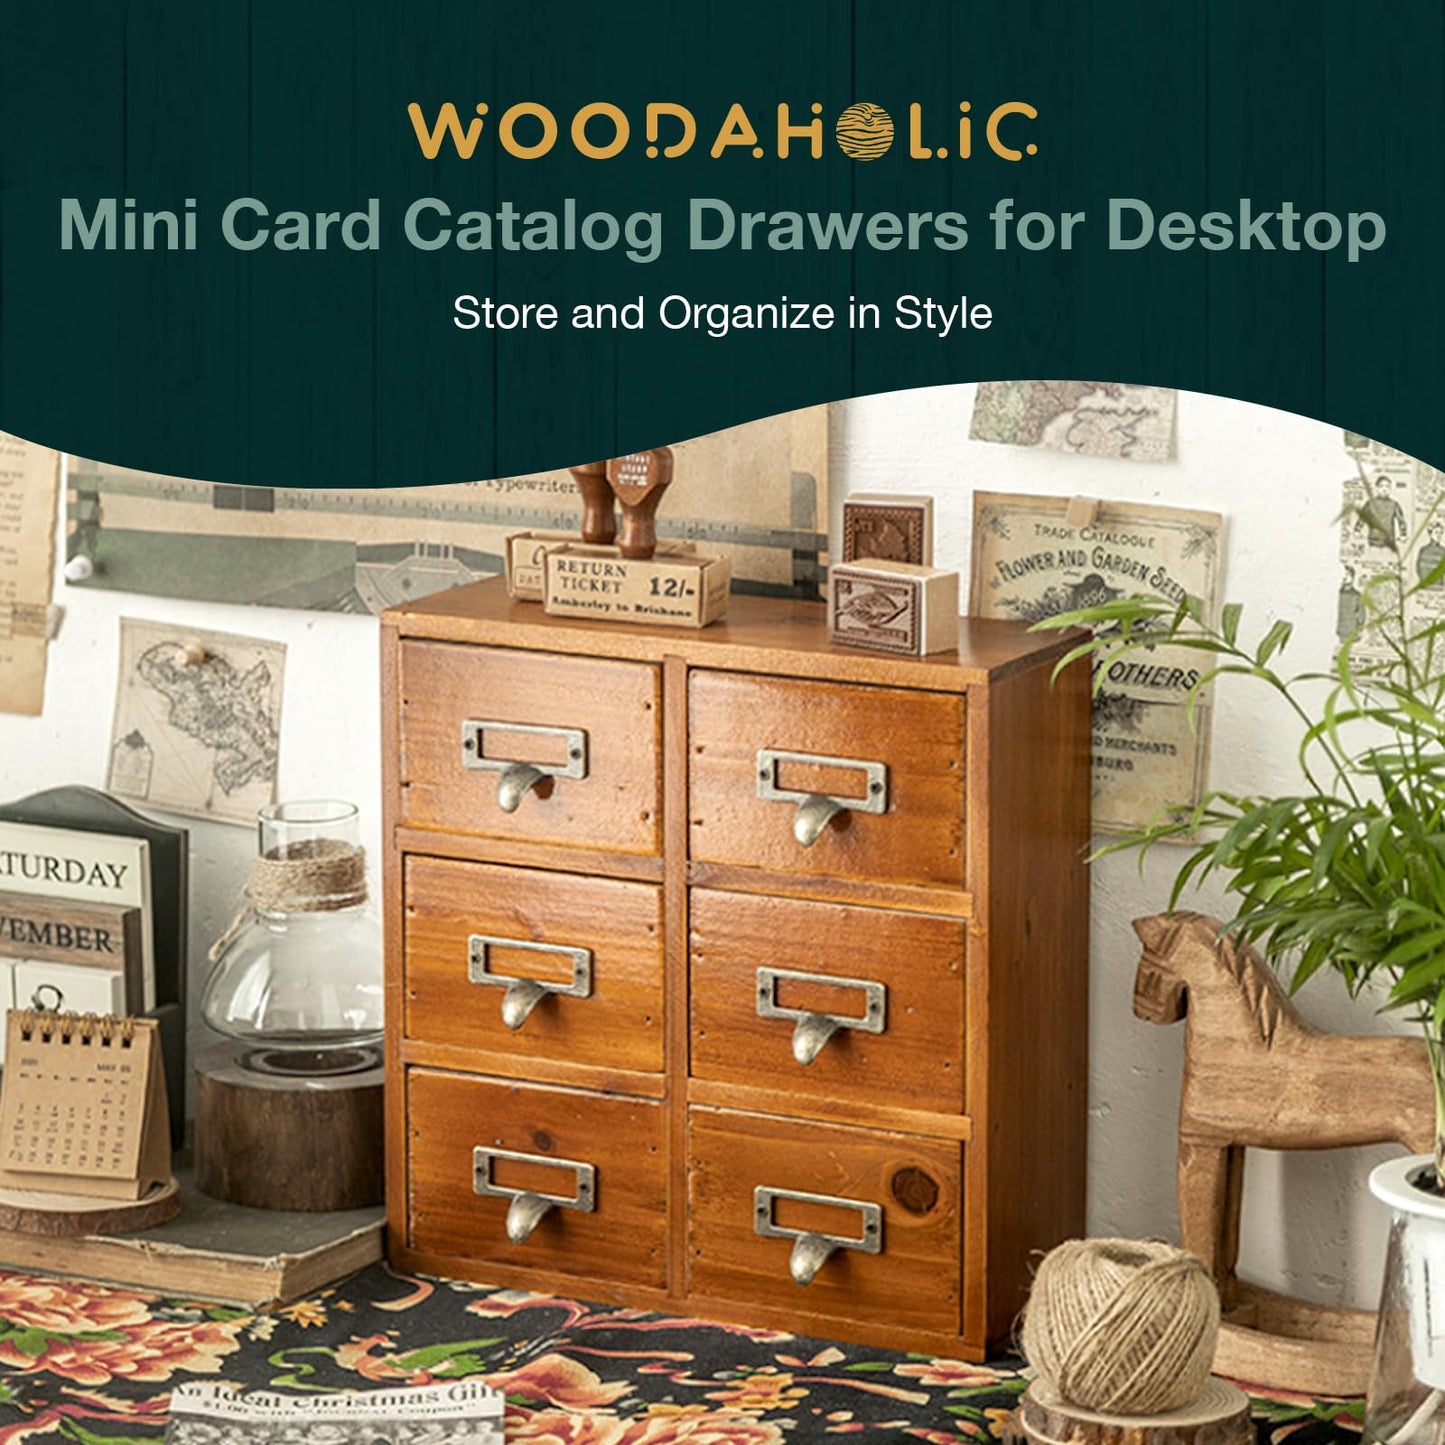 Vintage Card Catalog Drawers for Desktop - 6-Drawer Mini Wood Desktop Cabinet for Office Study Table - Solid Wood Storage Drawers for Table - Mahogany Wood Organizer Cabinet Drawers, Fully Assembled